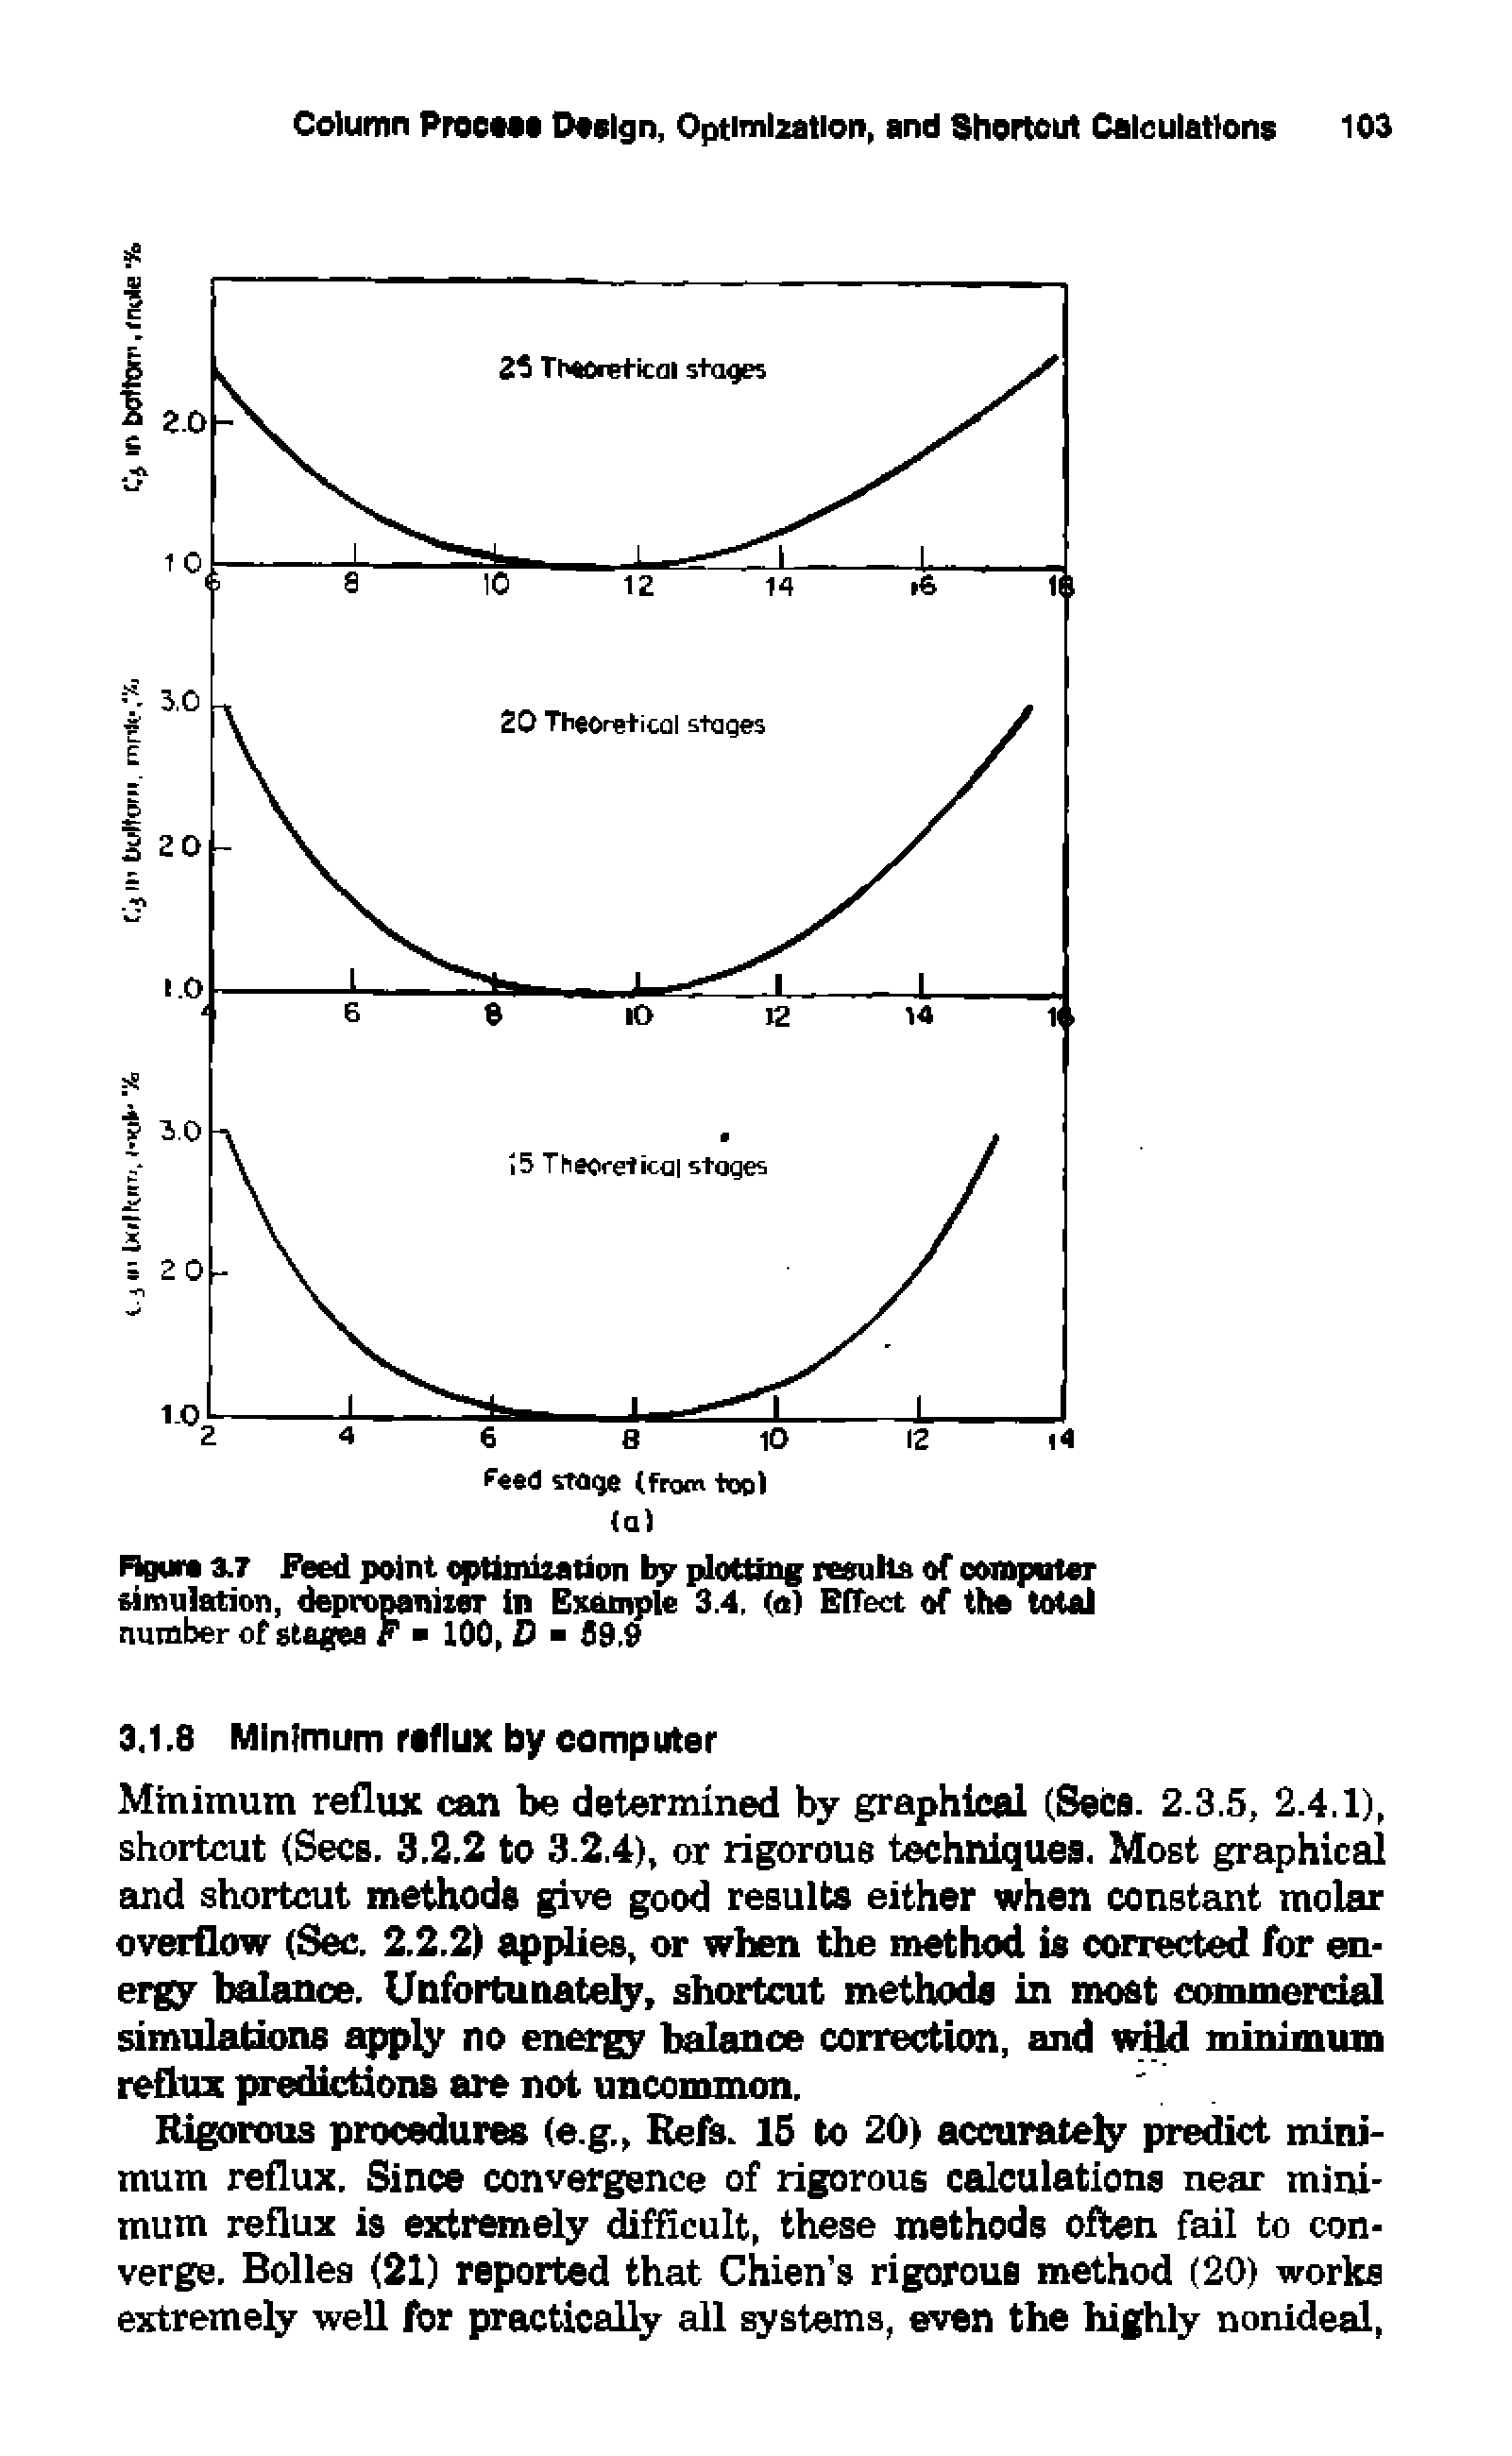 Figure 3.7 Feed point optimization by plotting results of computer simulation, depropanizer in Example 3.4, (a) Effect of the total number of stages F 100, D 39.9...